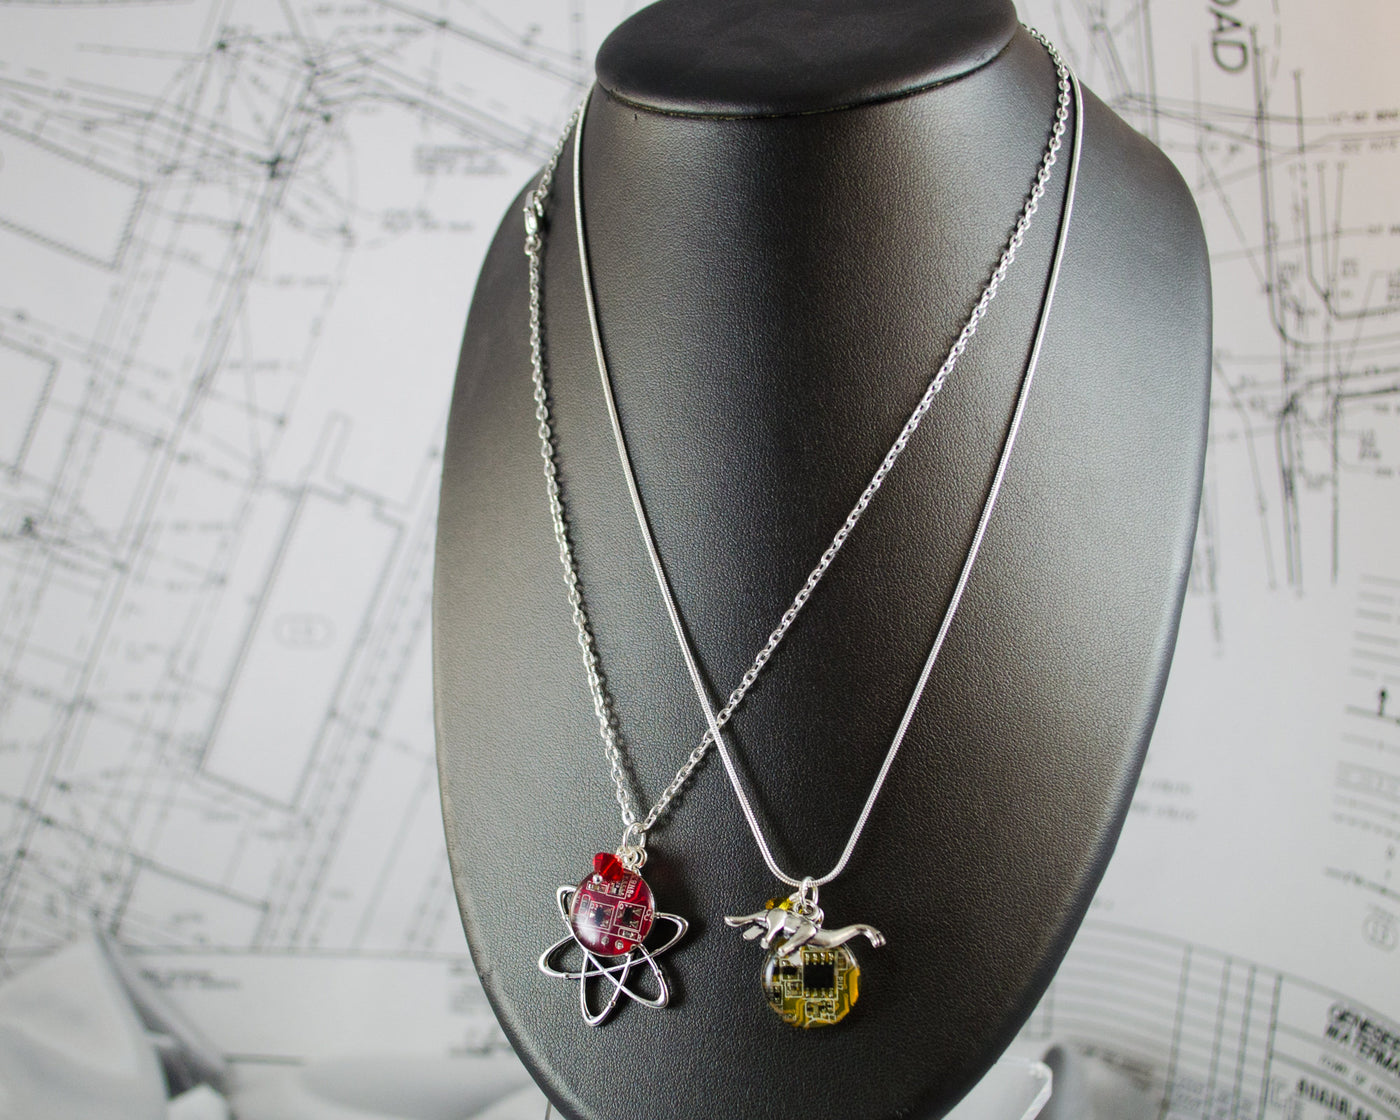 Dinosaur and Circuit Board Charm Necklace